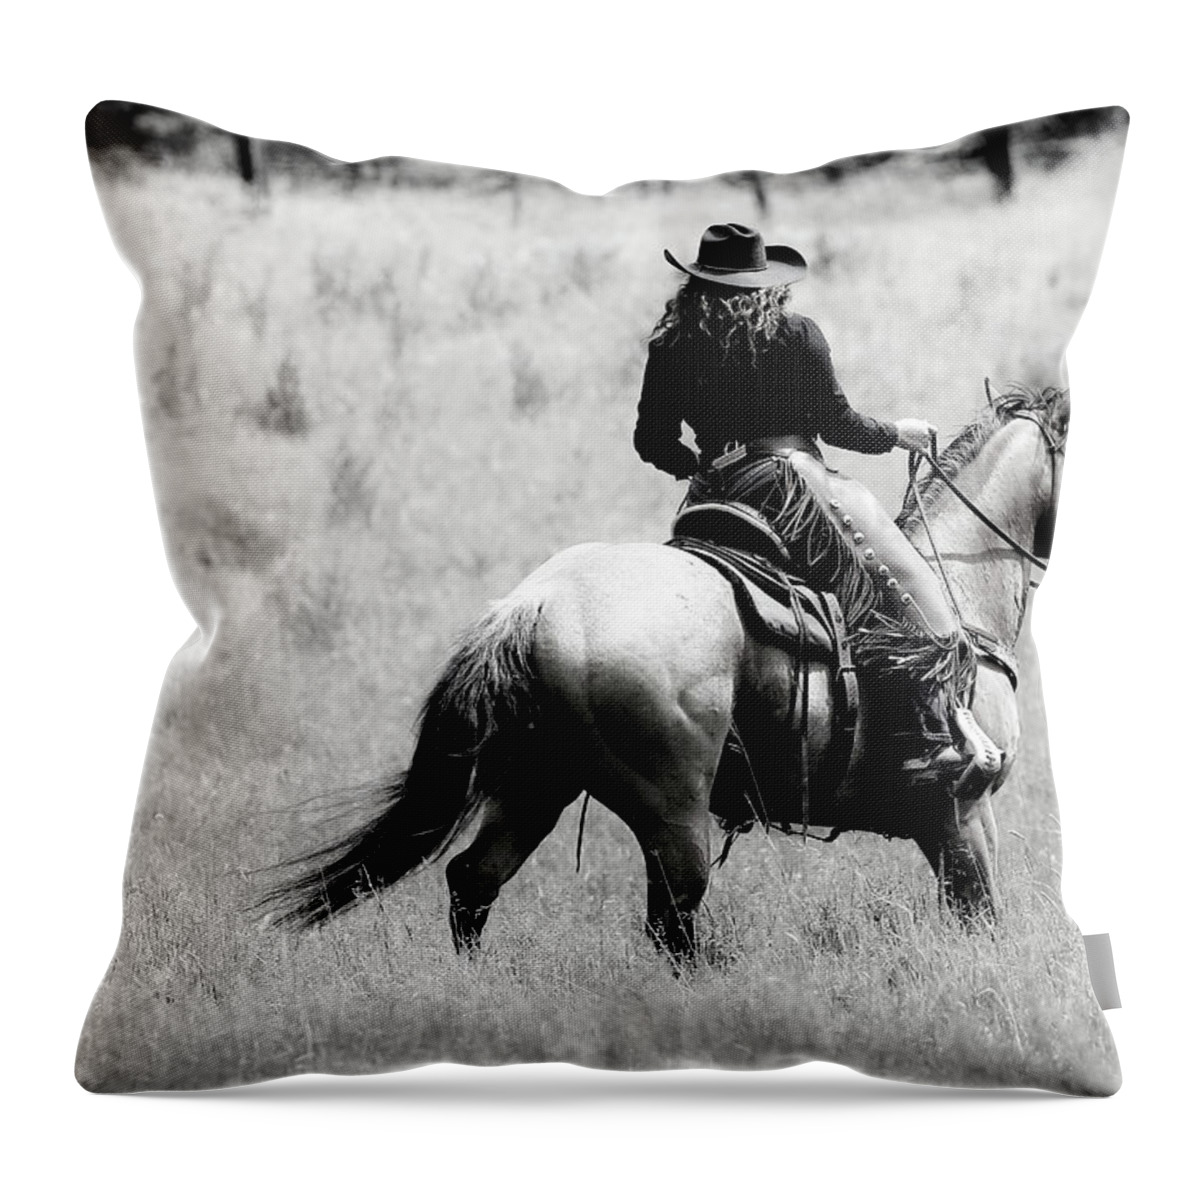 Cowgirl Throw Pillow featuring the photograph Cowgirl Horseback by Athena Mckinzie